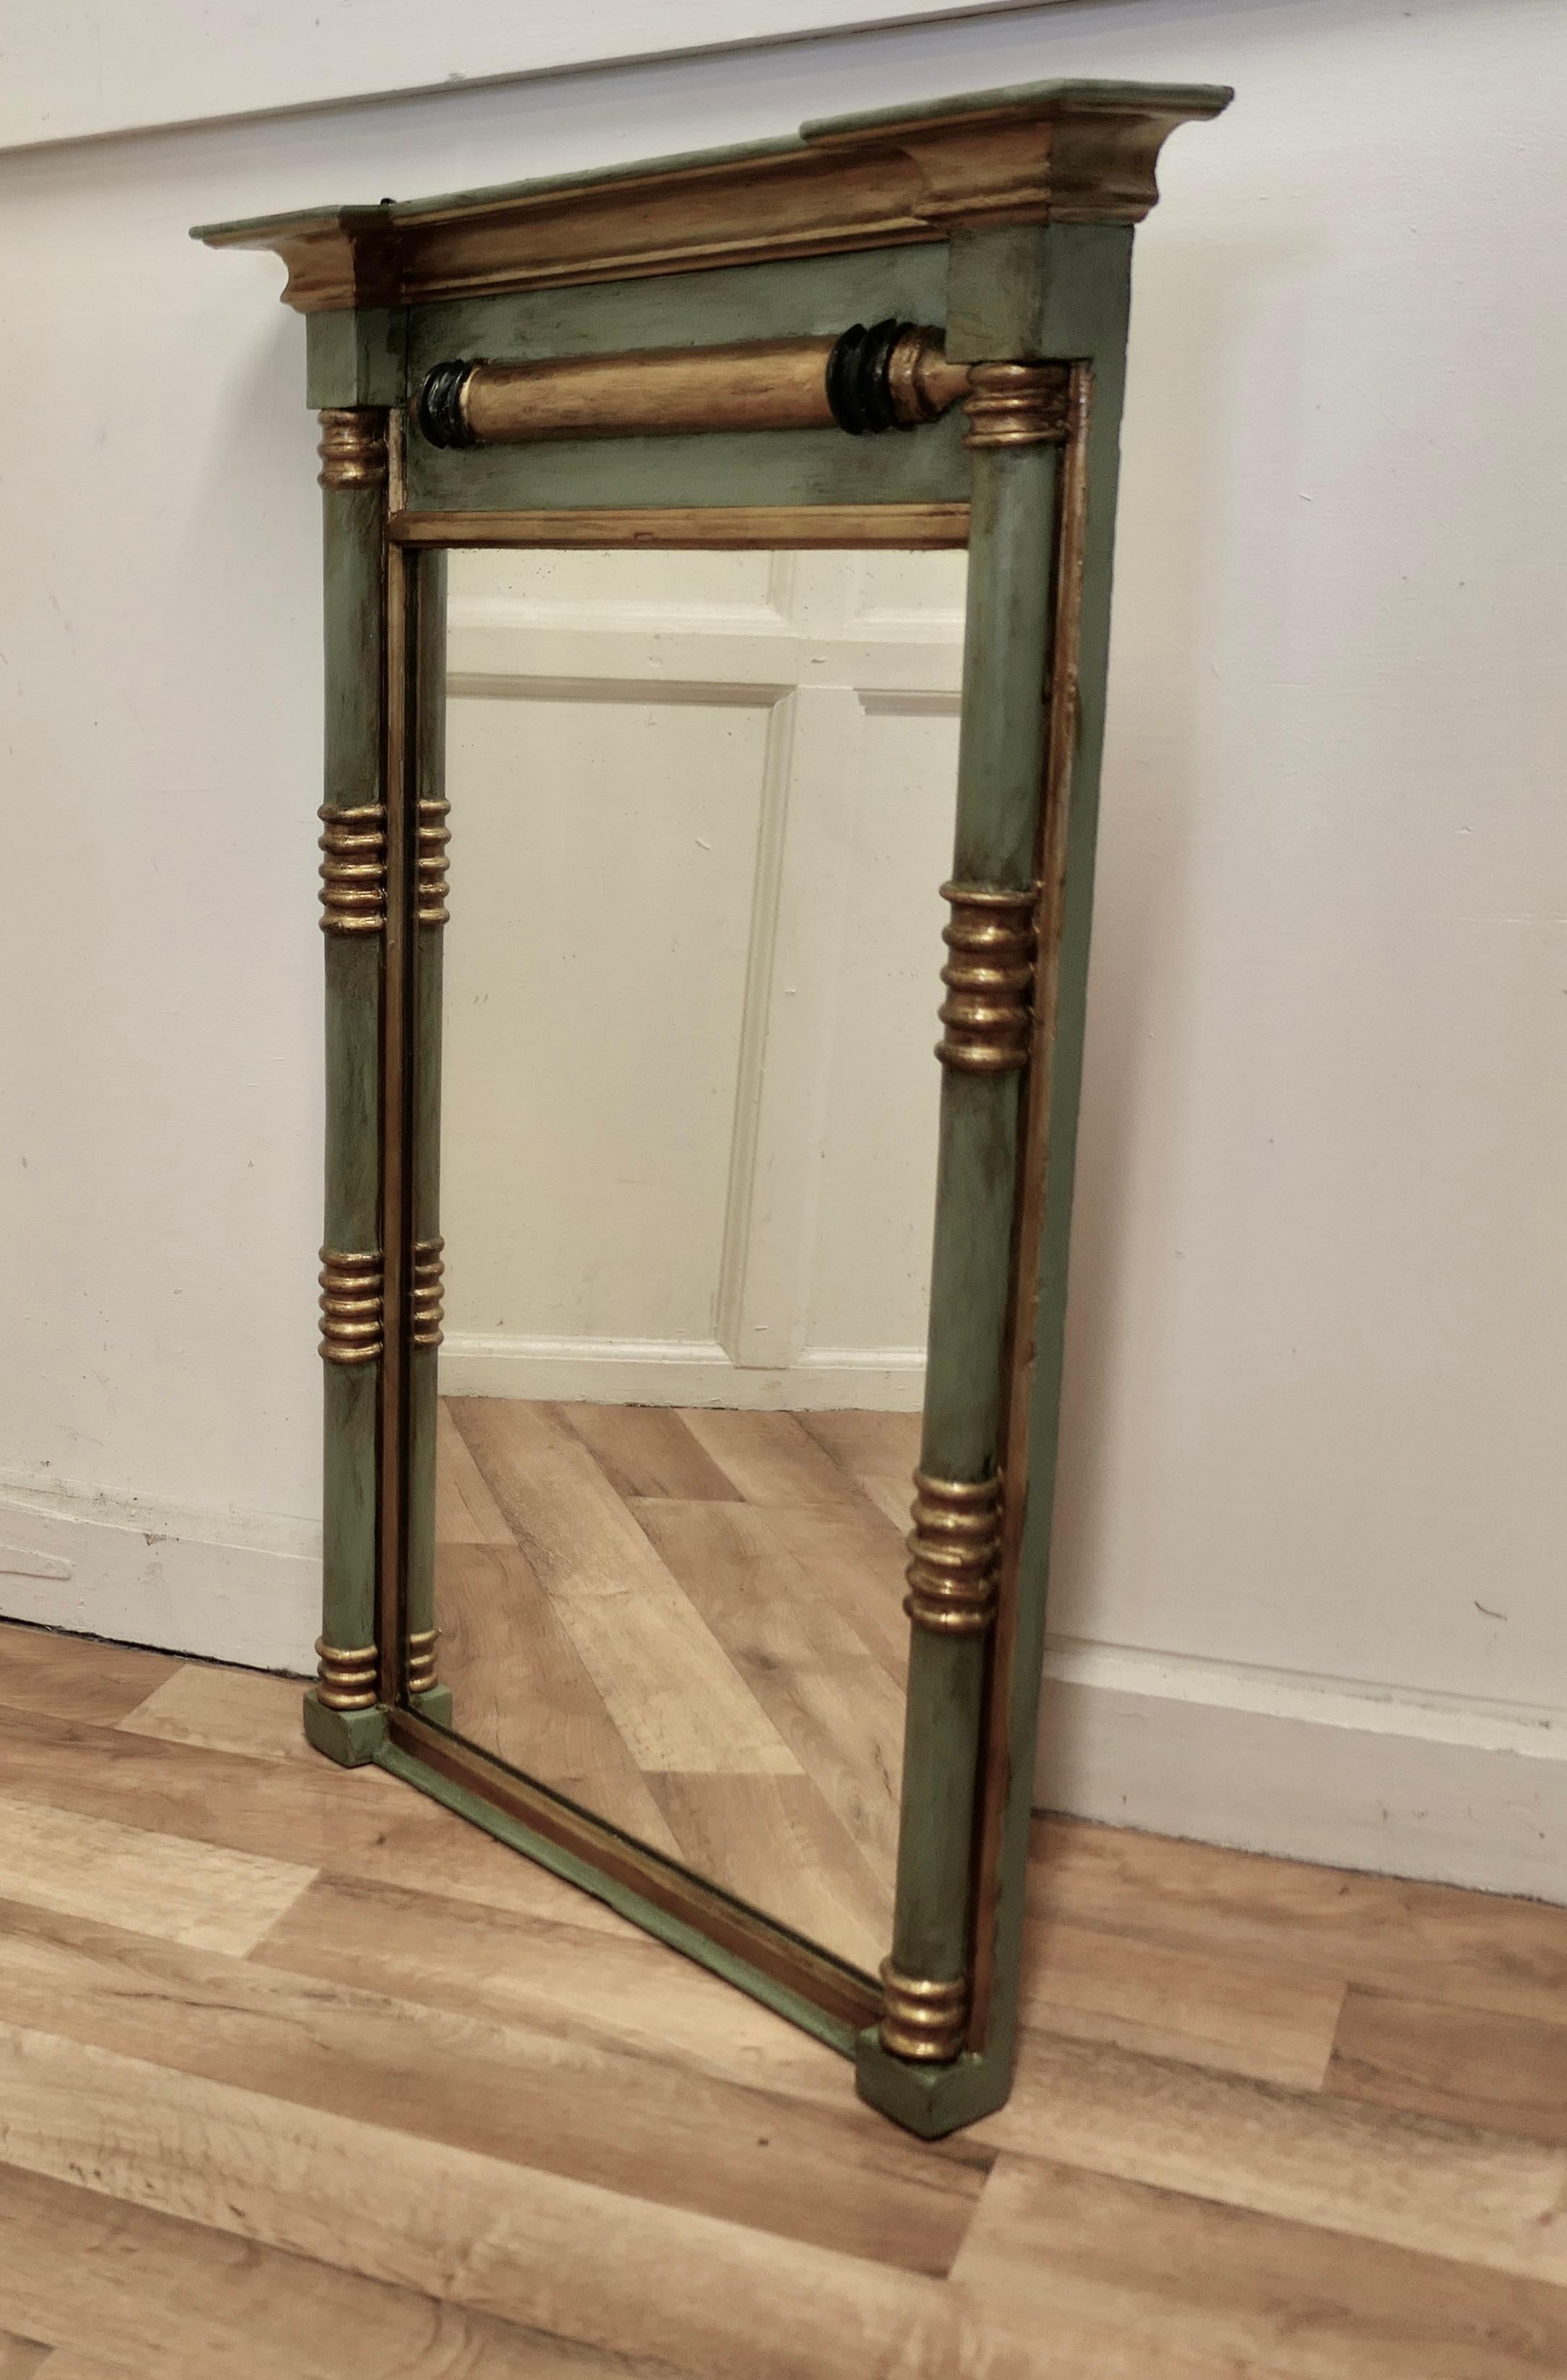 19th Century Regency moss green gilt mirror or over mantle. 

The Regency green carved frame has turned columns at either side and along the top, the Age Darkened Gold paint on the Frame has a genuine shabby look, but in generally good